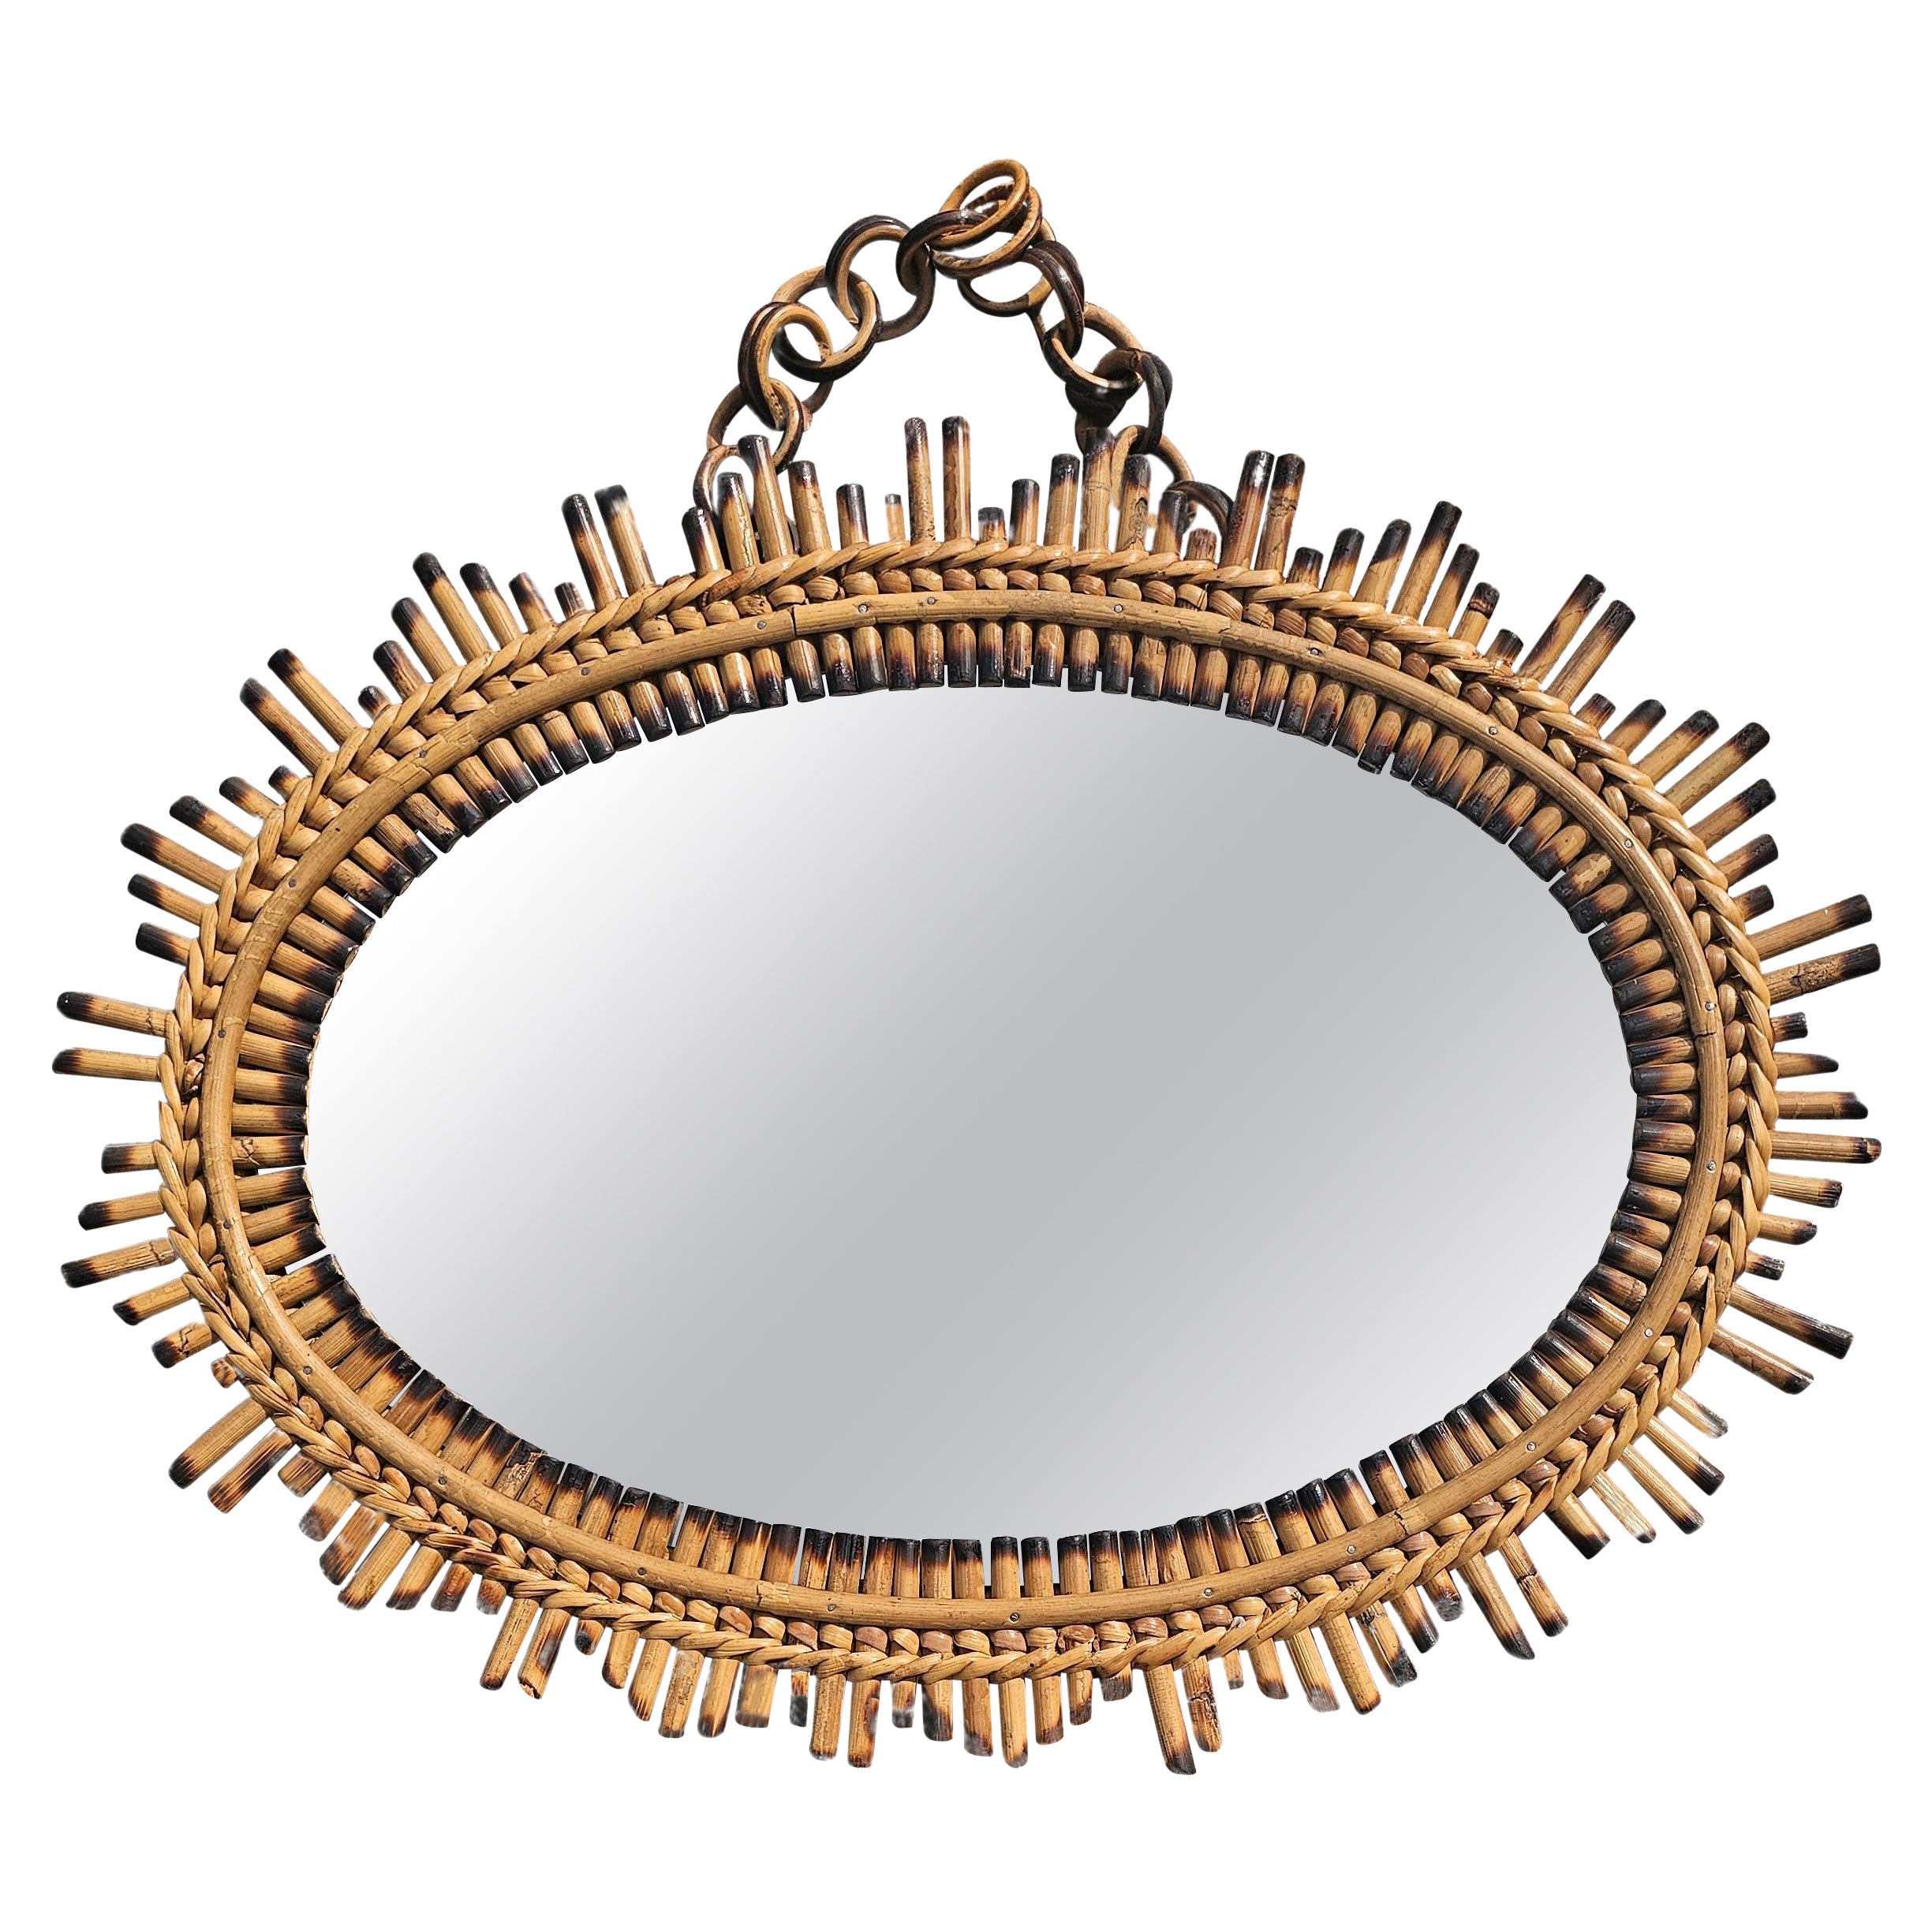 Mid Century Modern Sunburst Mirror with Bamboo Frame, Italy 1960s For Sale